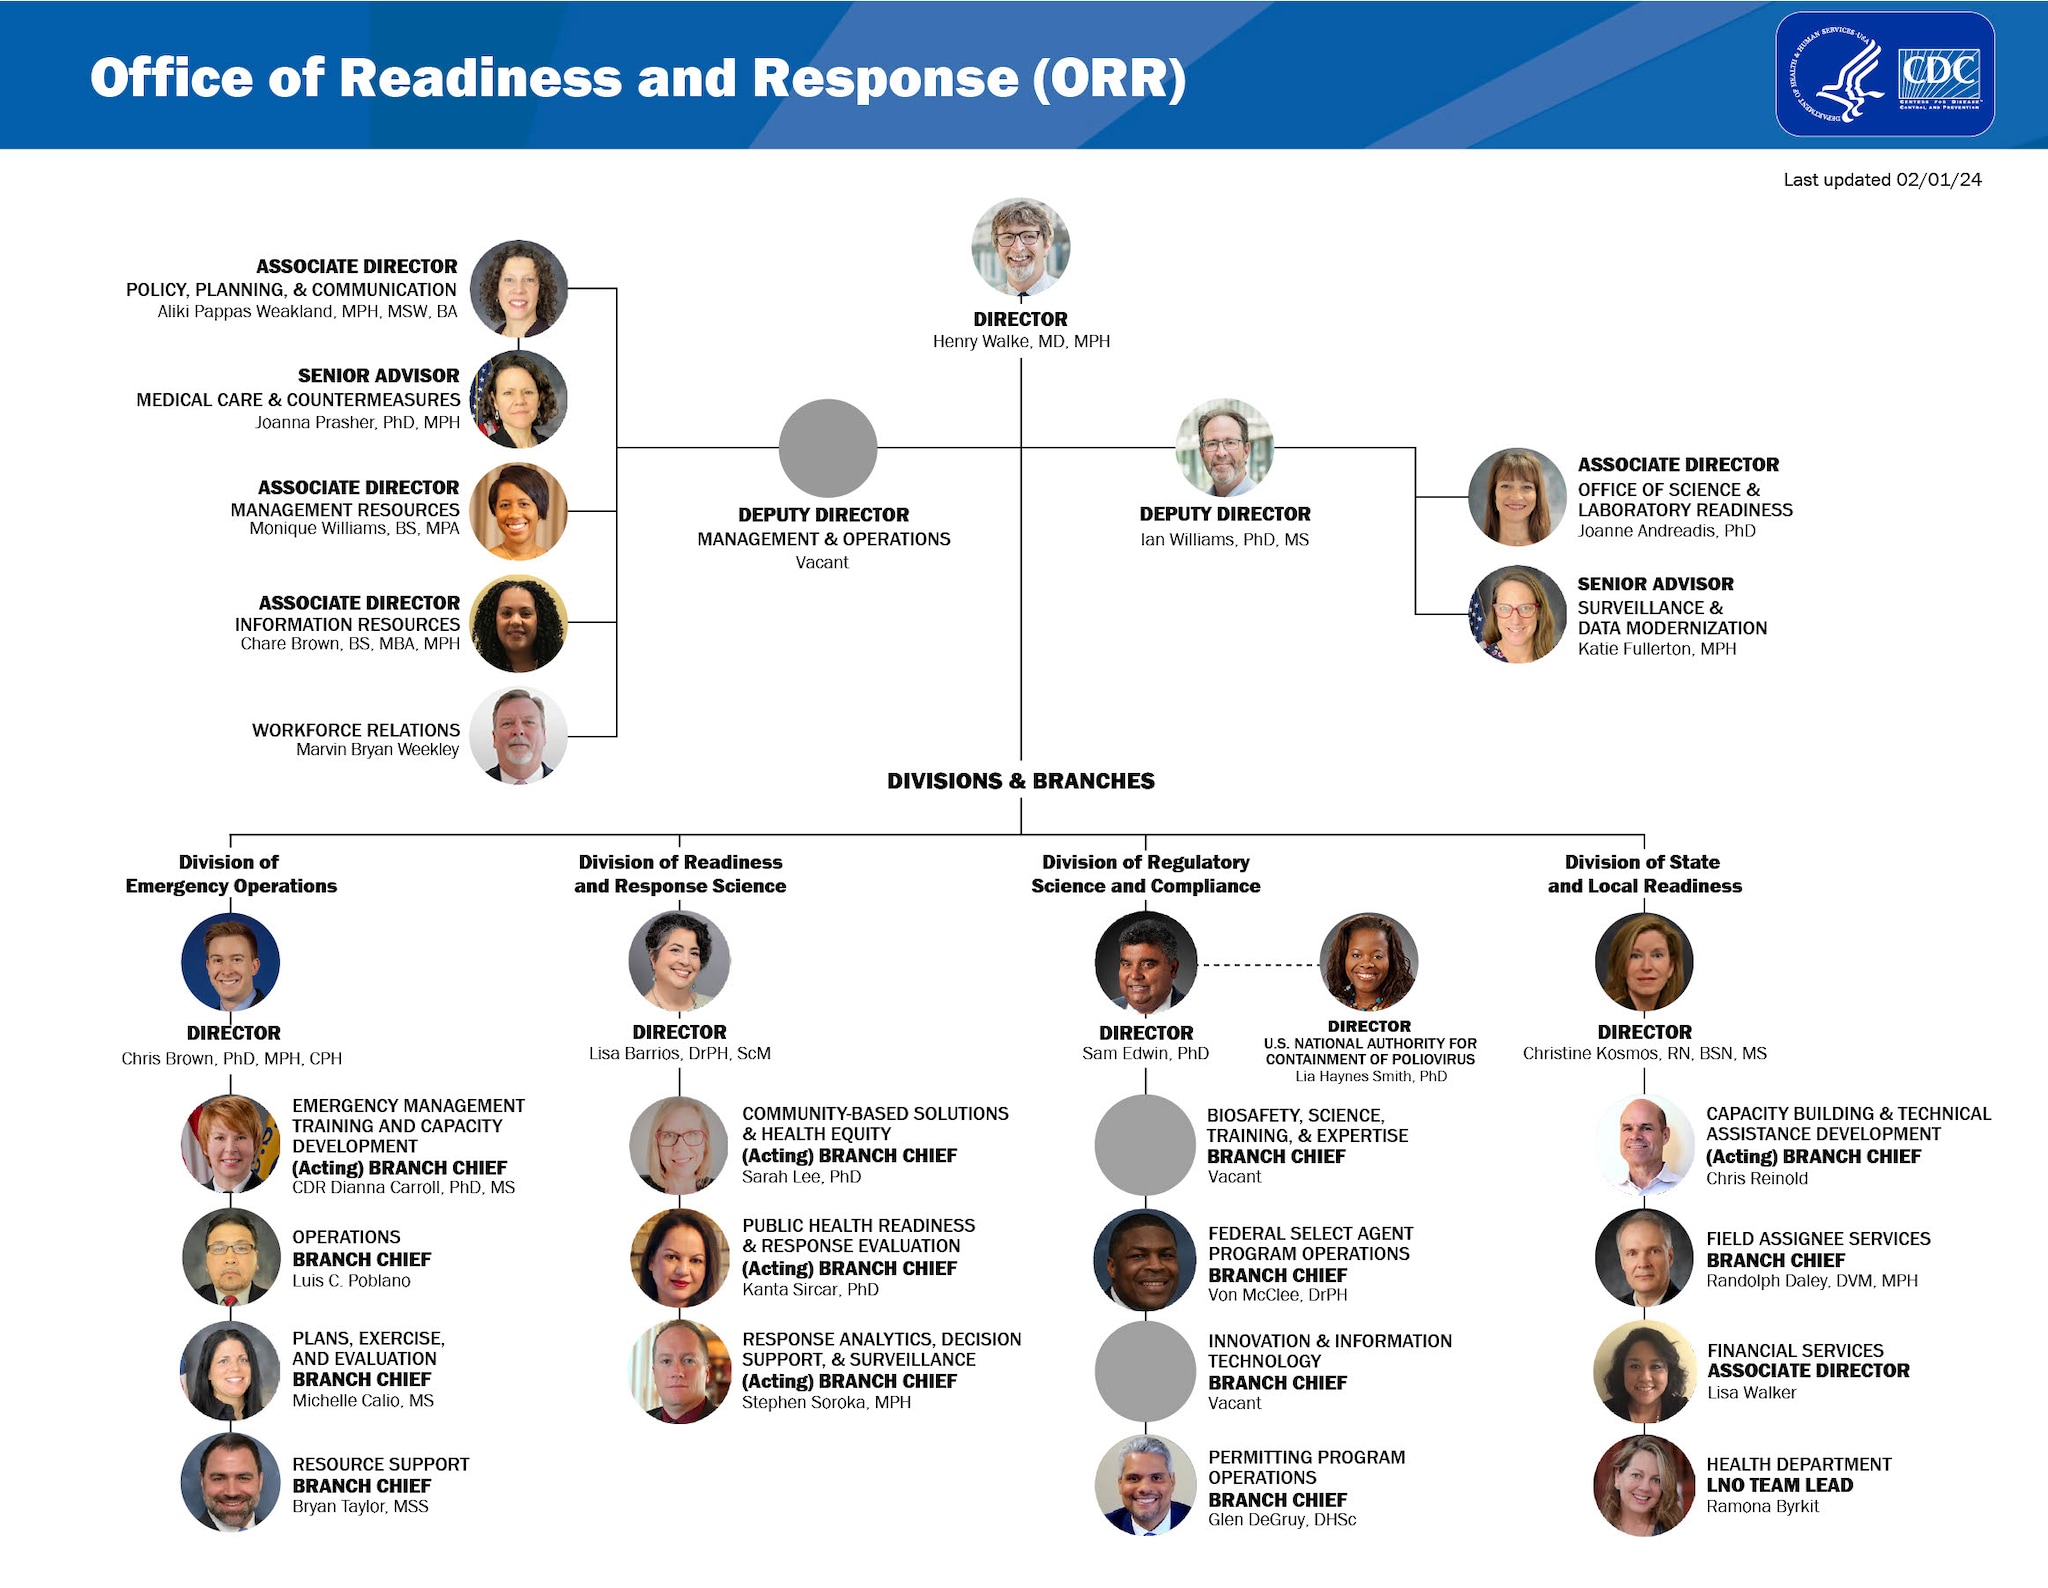 Organizational Chart for CDC's Office of Readiness and Response